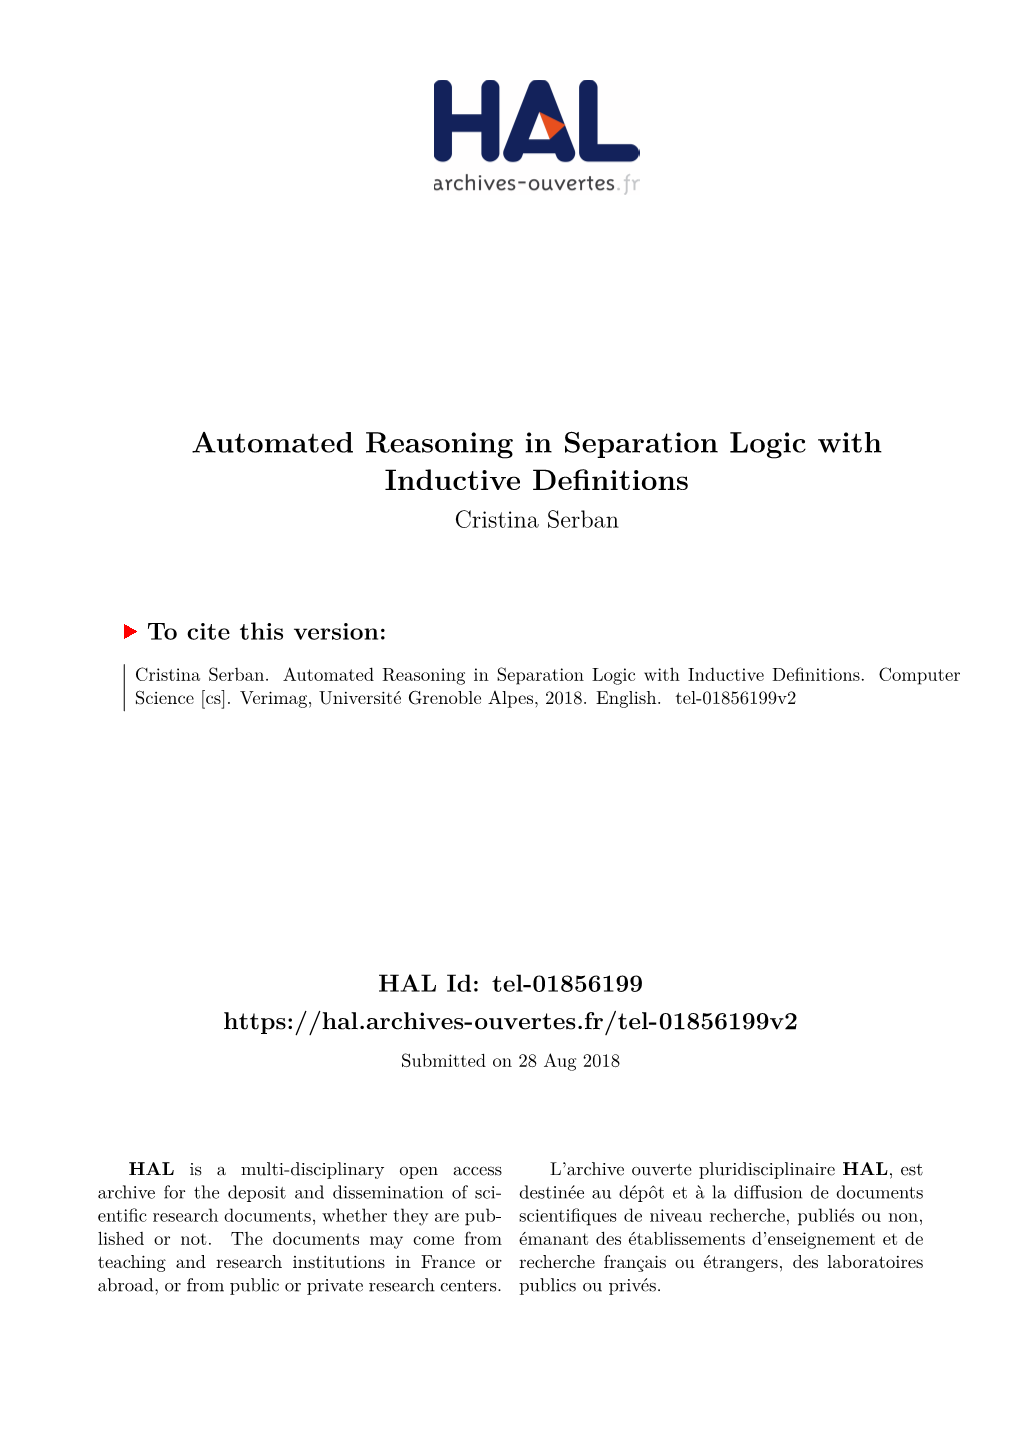 Automated Reasoning in Separation Logic with Inductive Definitions Cristina Serban